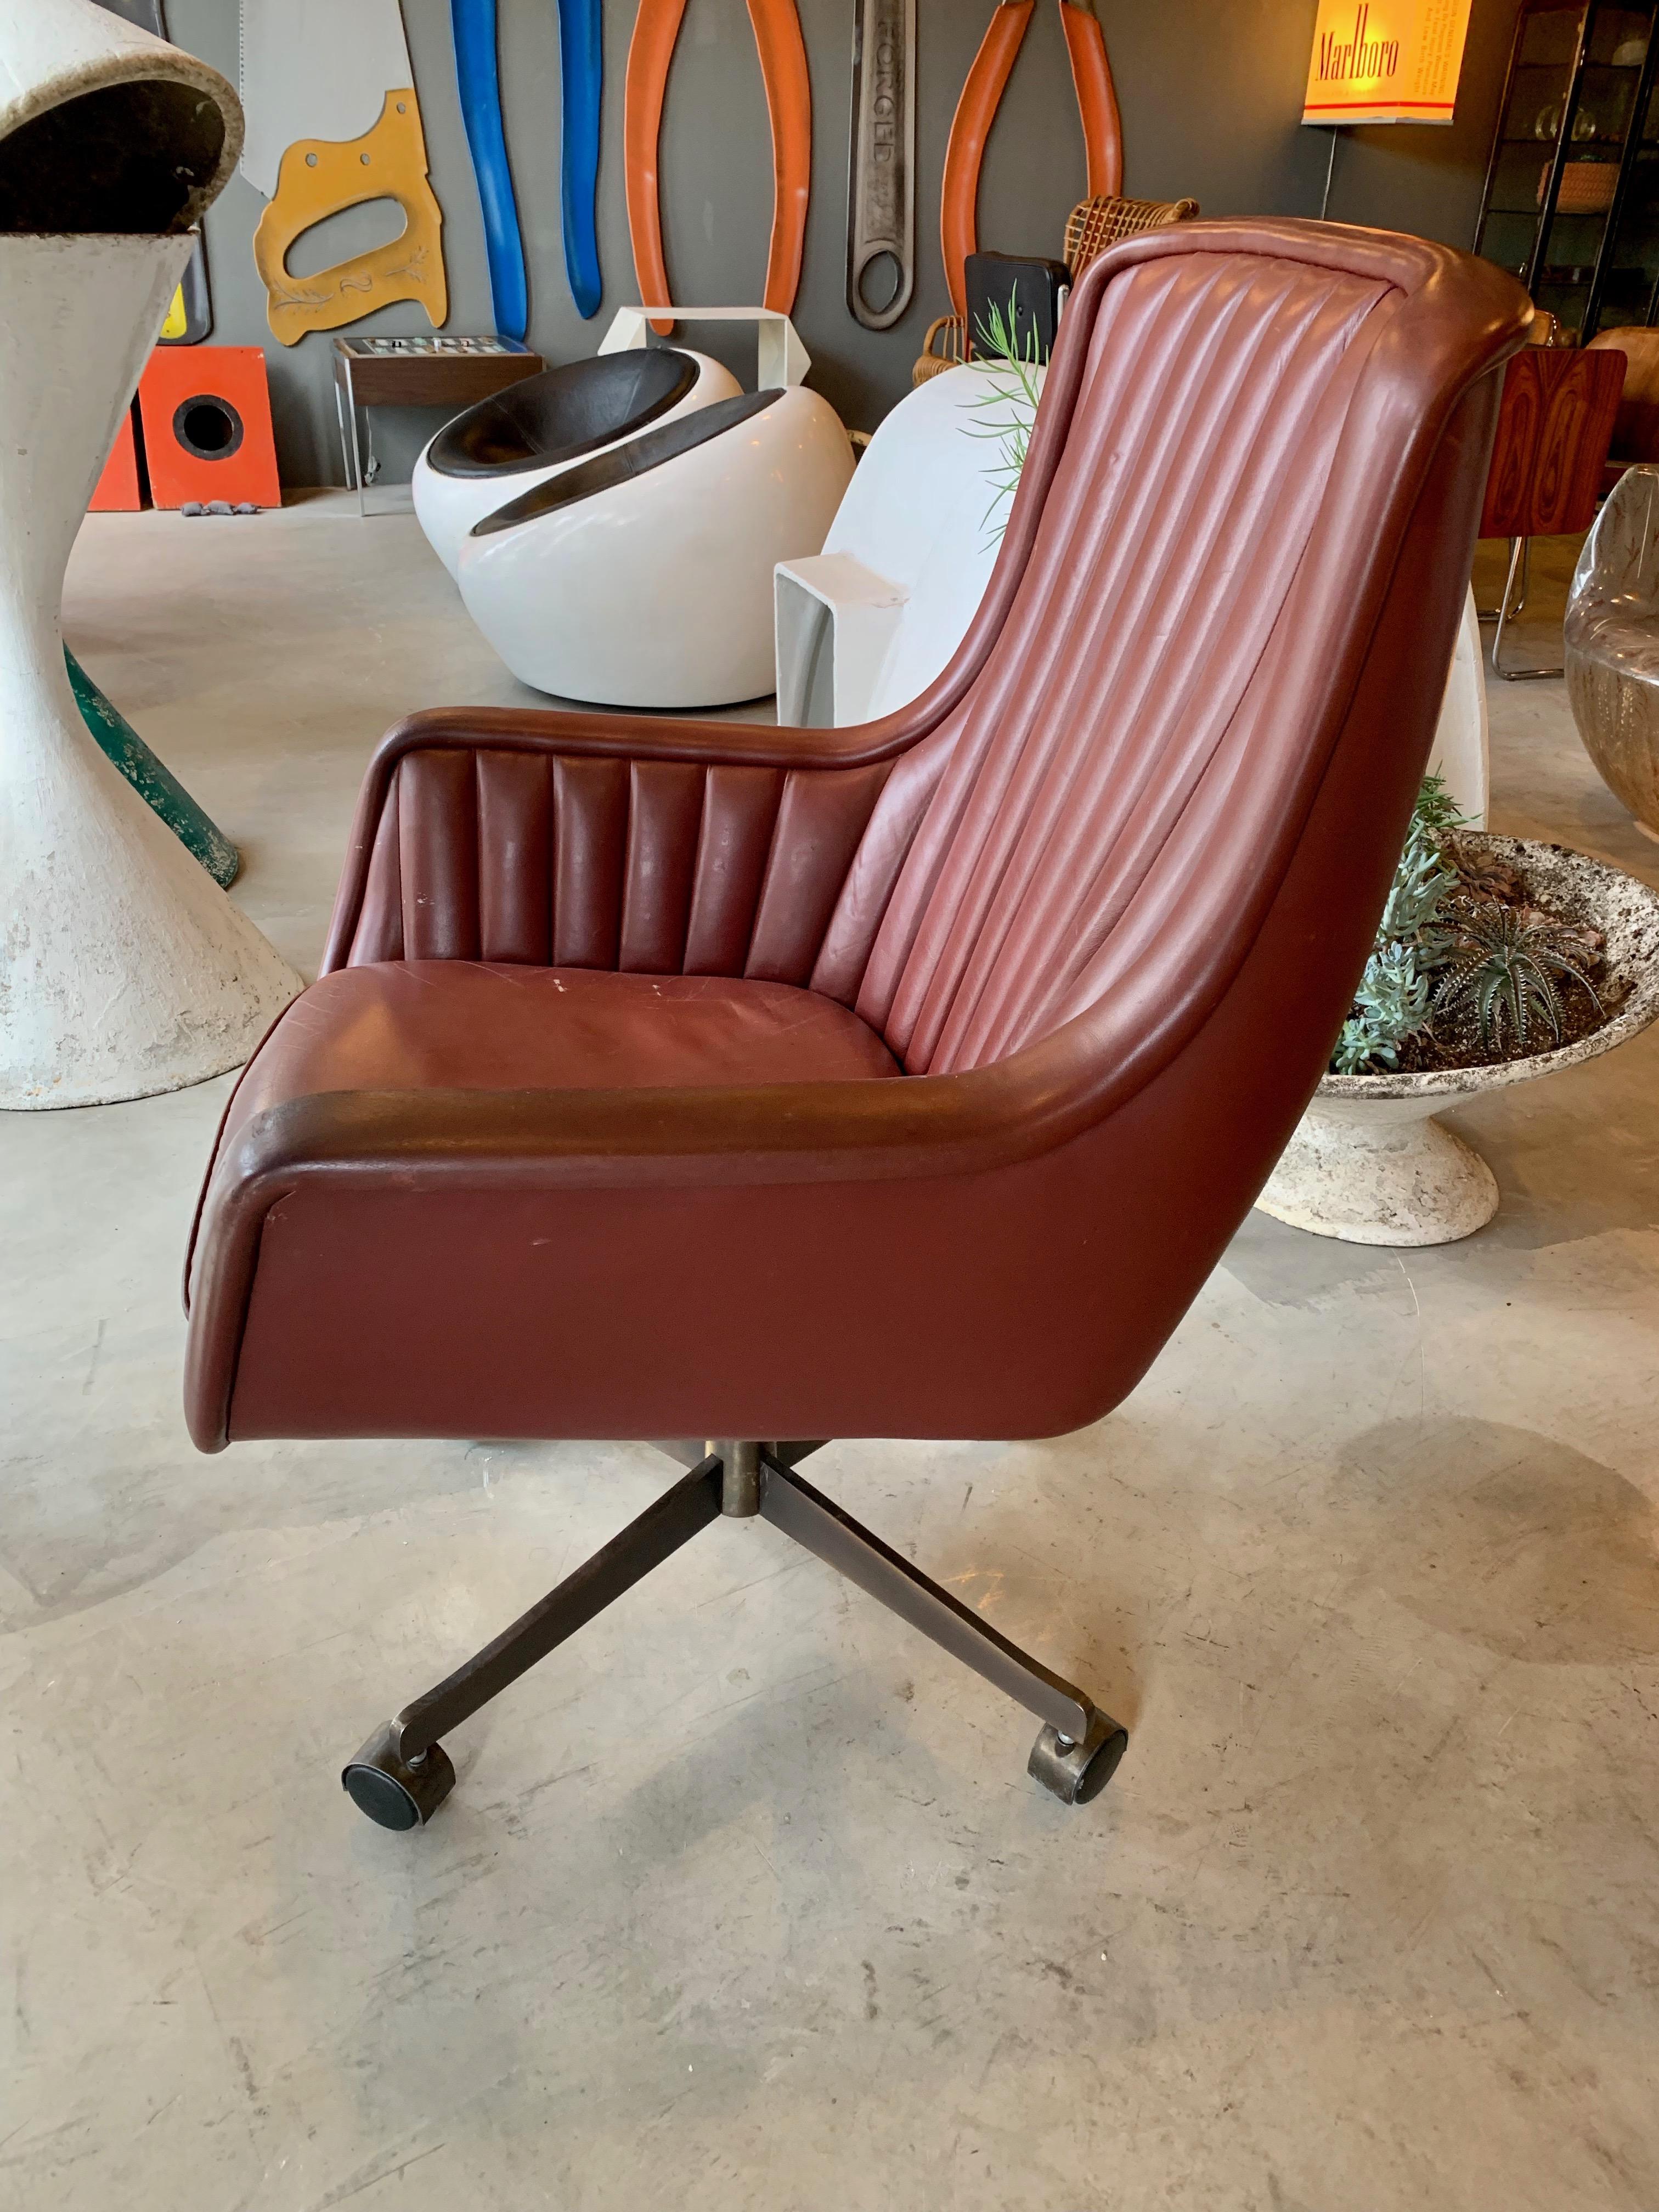 Elegant leather desk chair by Ward Bennett for Brickell Associates. Original tags dated 1984. Oil rubbed bronze base. Reclines and swivels. Height is adjustable. Great vintage condition. Terribly comfortable.